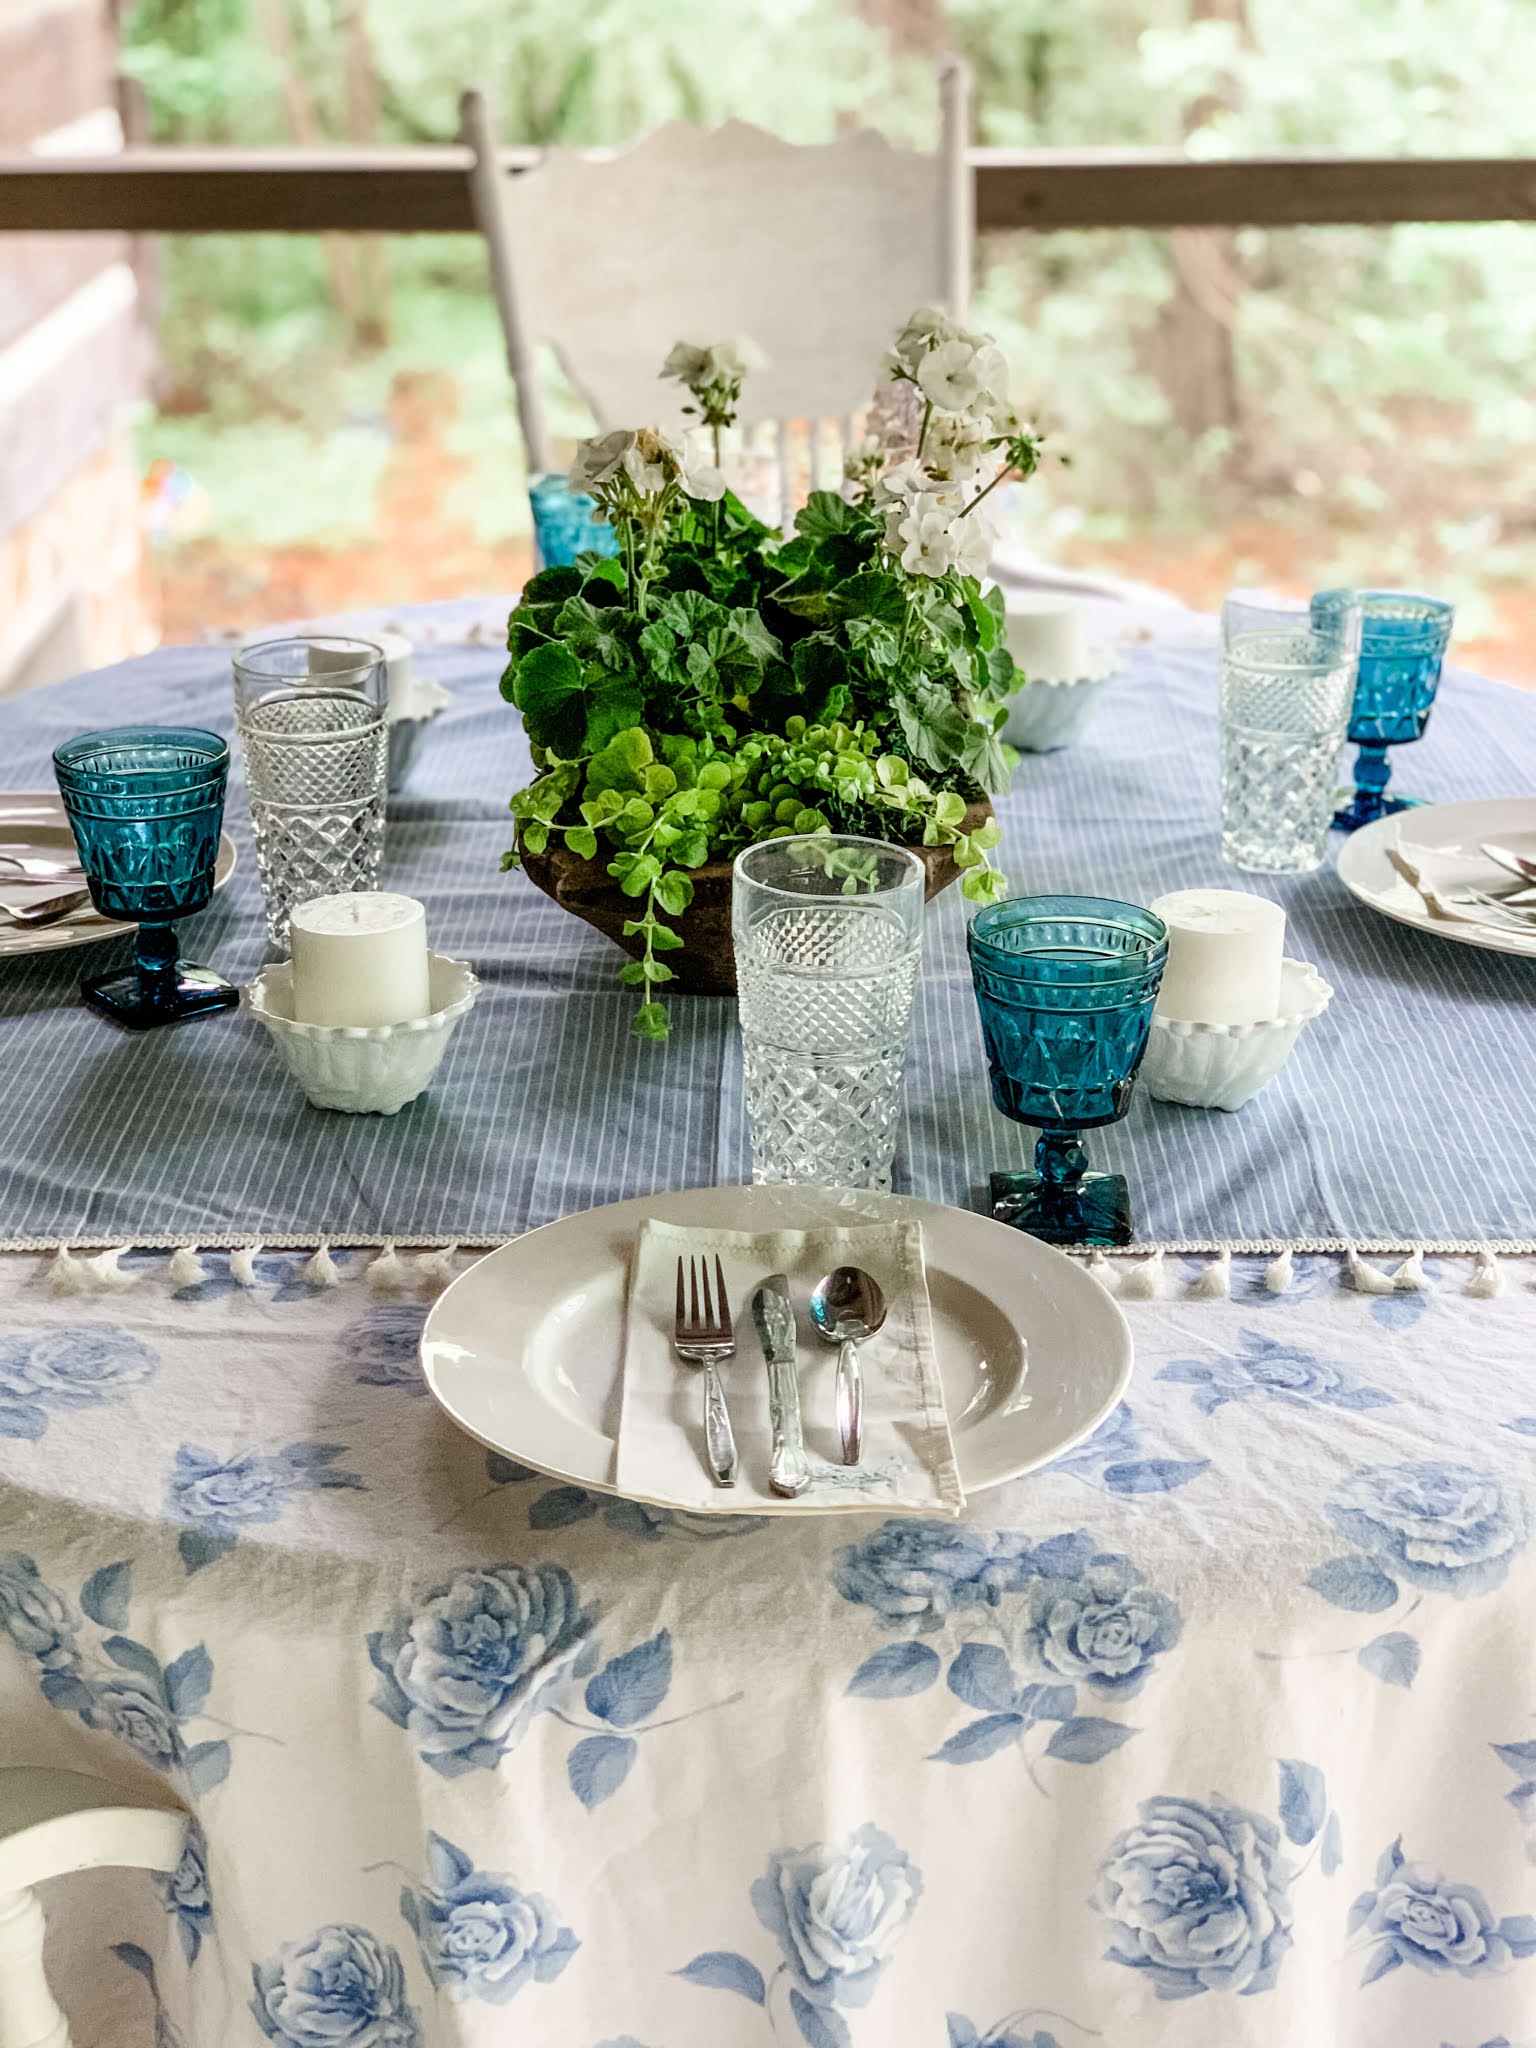 DIY Painted Sparrow Chargers for a Spring Table